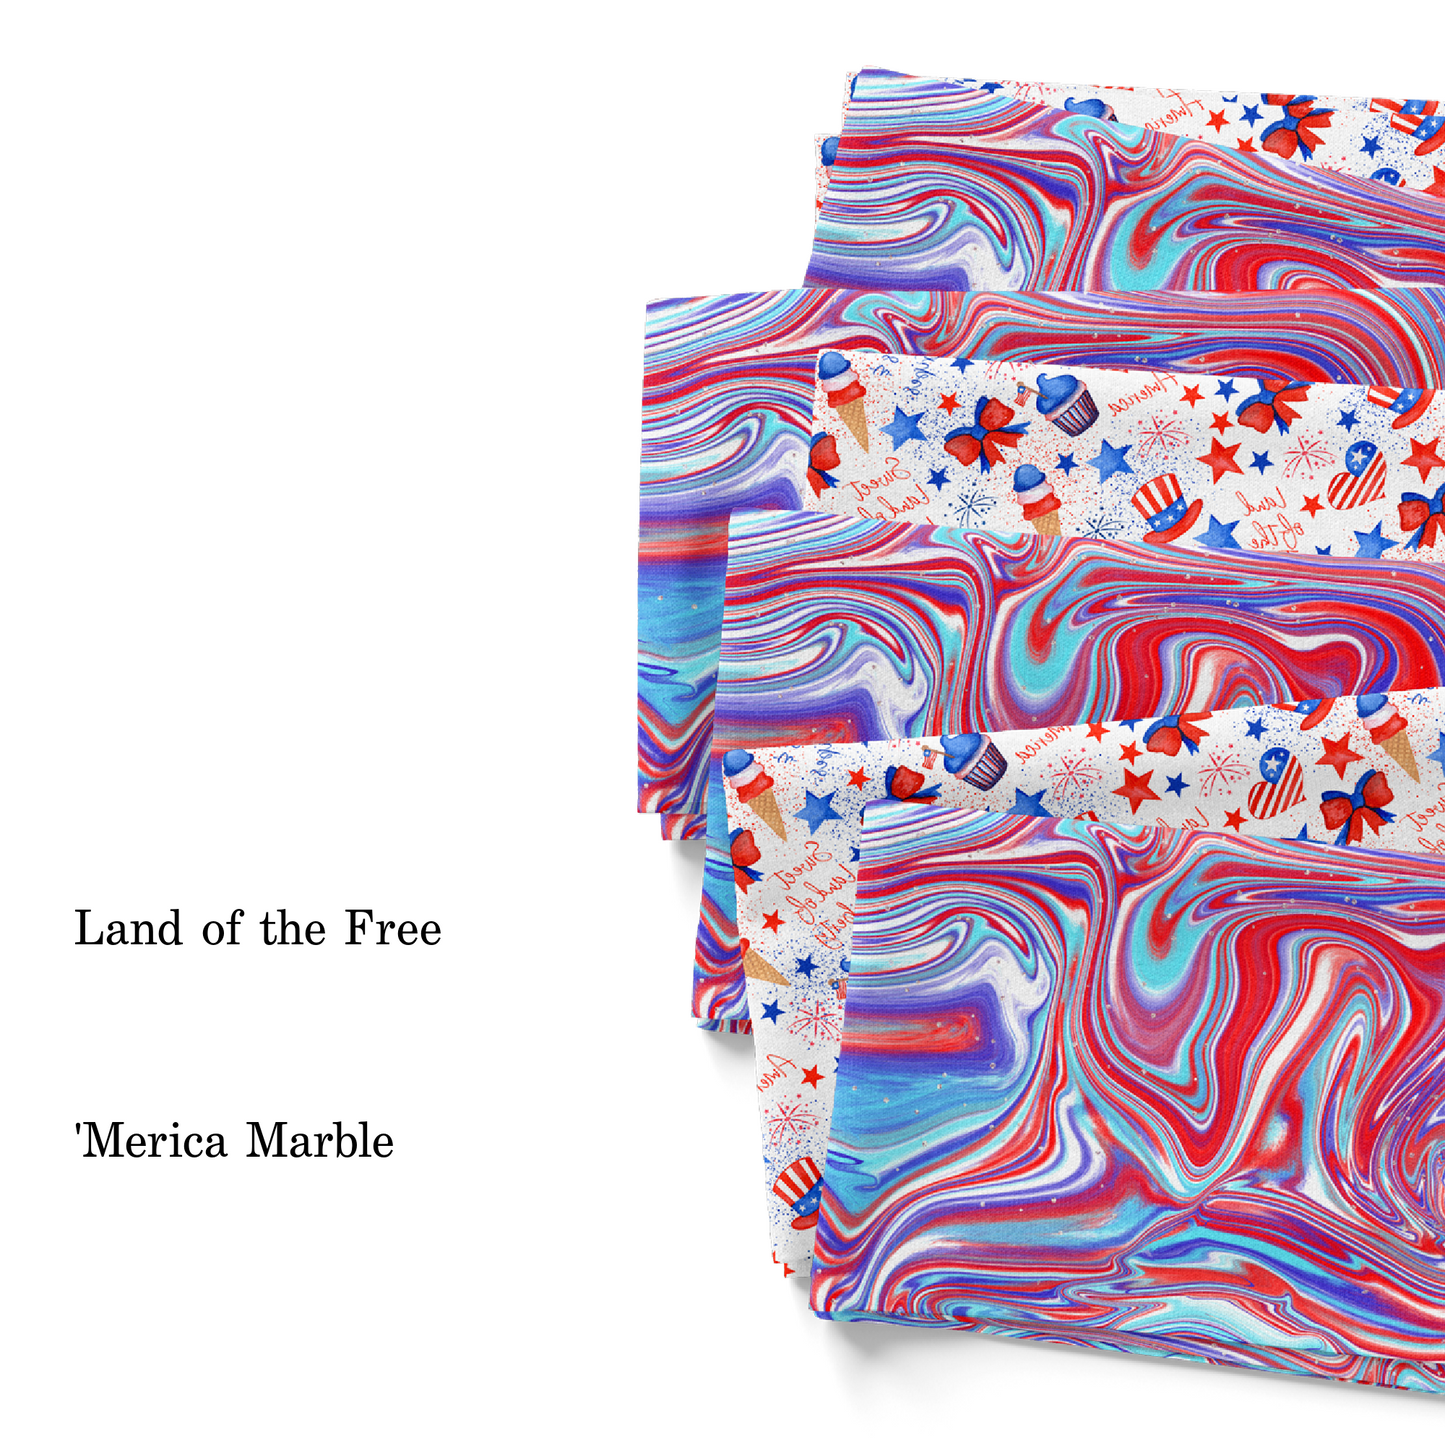 Pip Supply Fourth of July collection fabric swatch - Land of the Free and 'Merica Marble